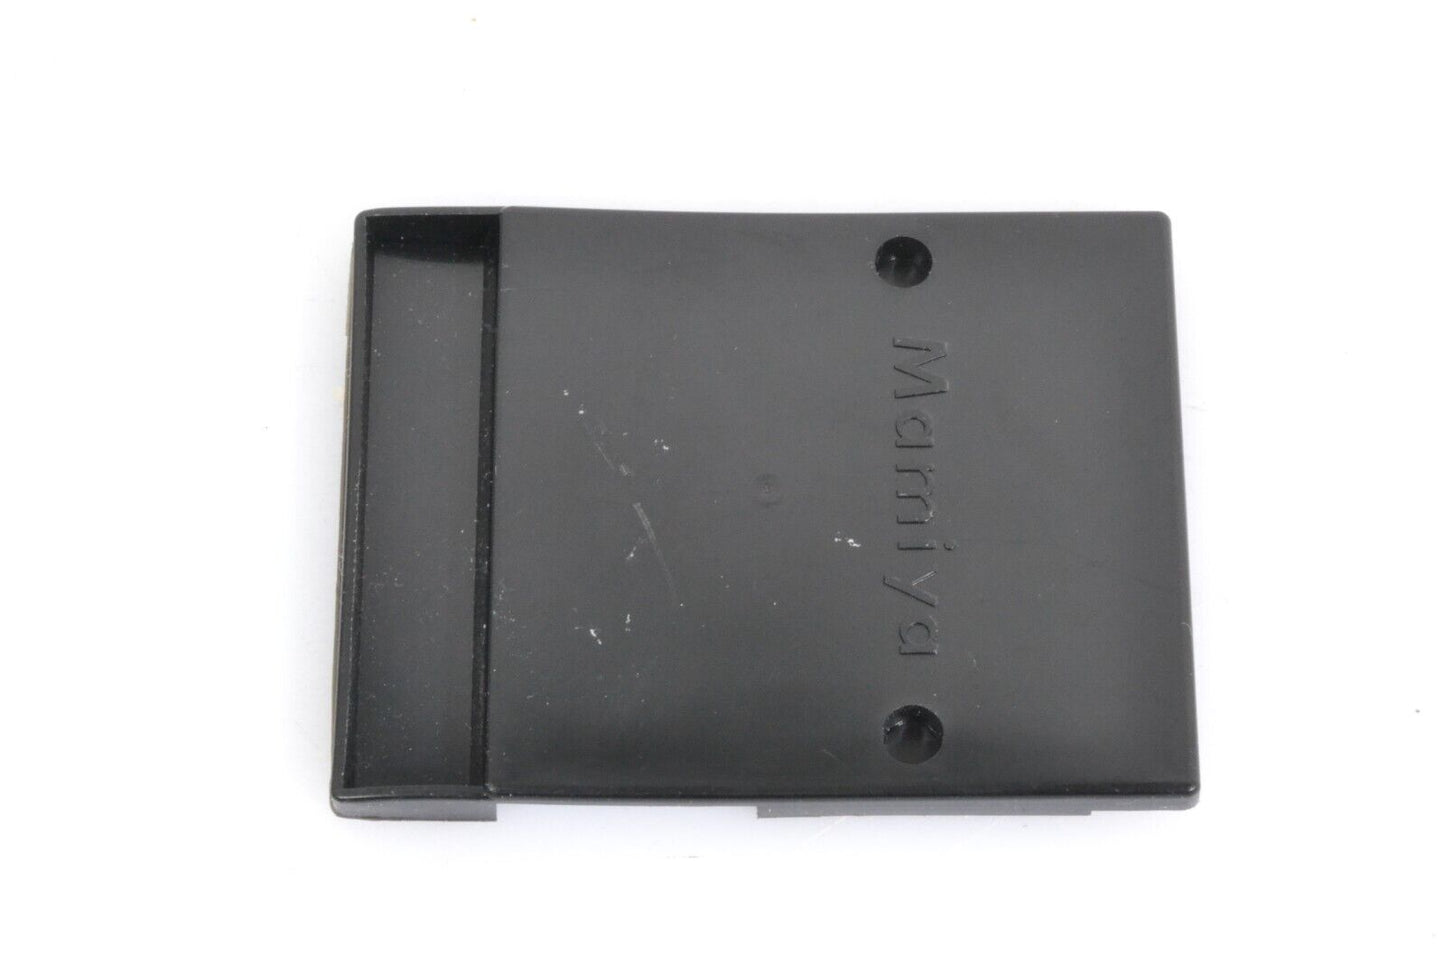 EXC++ MAMIYA 645 TOP COVER FOCUSING  SCREEN COVER FOR 645 M645 1000S J